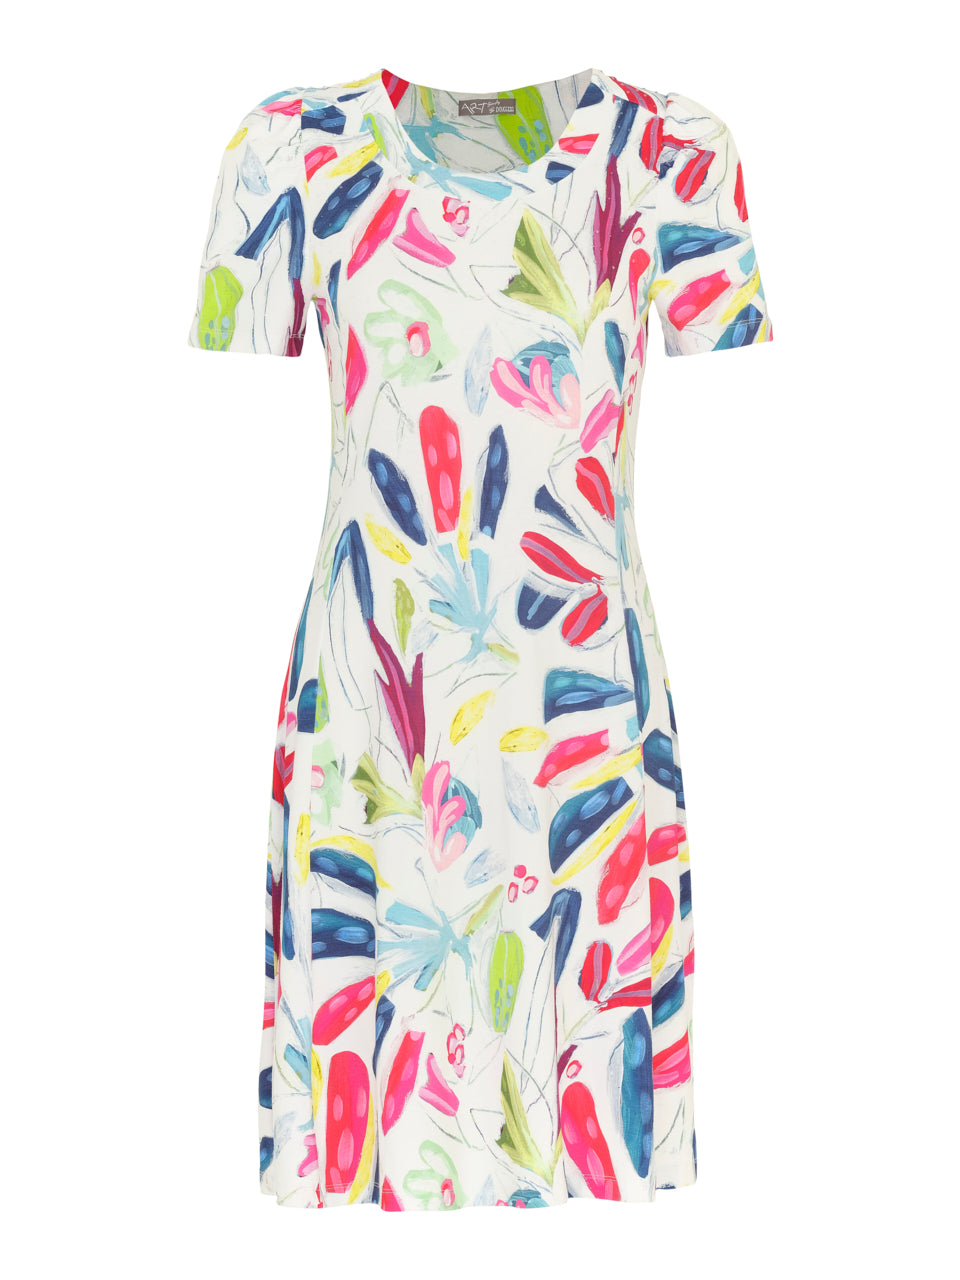 Dolcezza simply art inspired shift dress in tropical trace II print in multicolour (front)